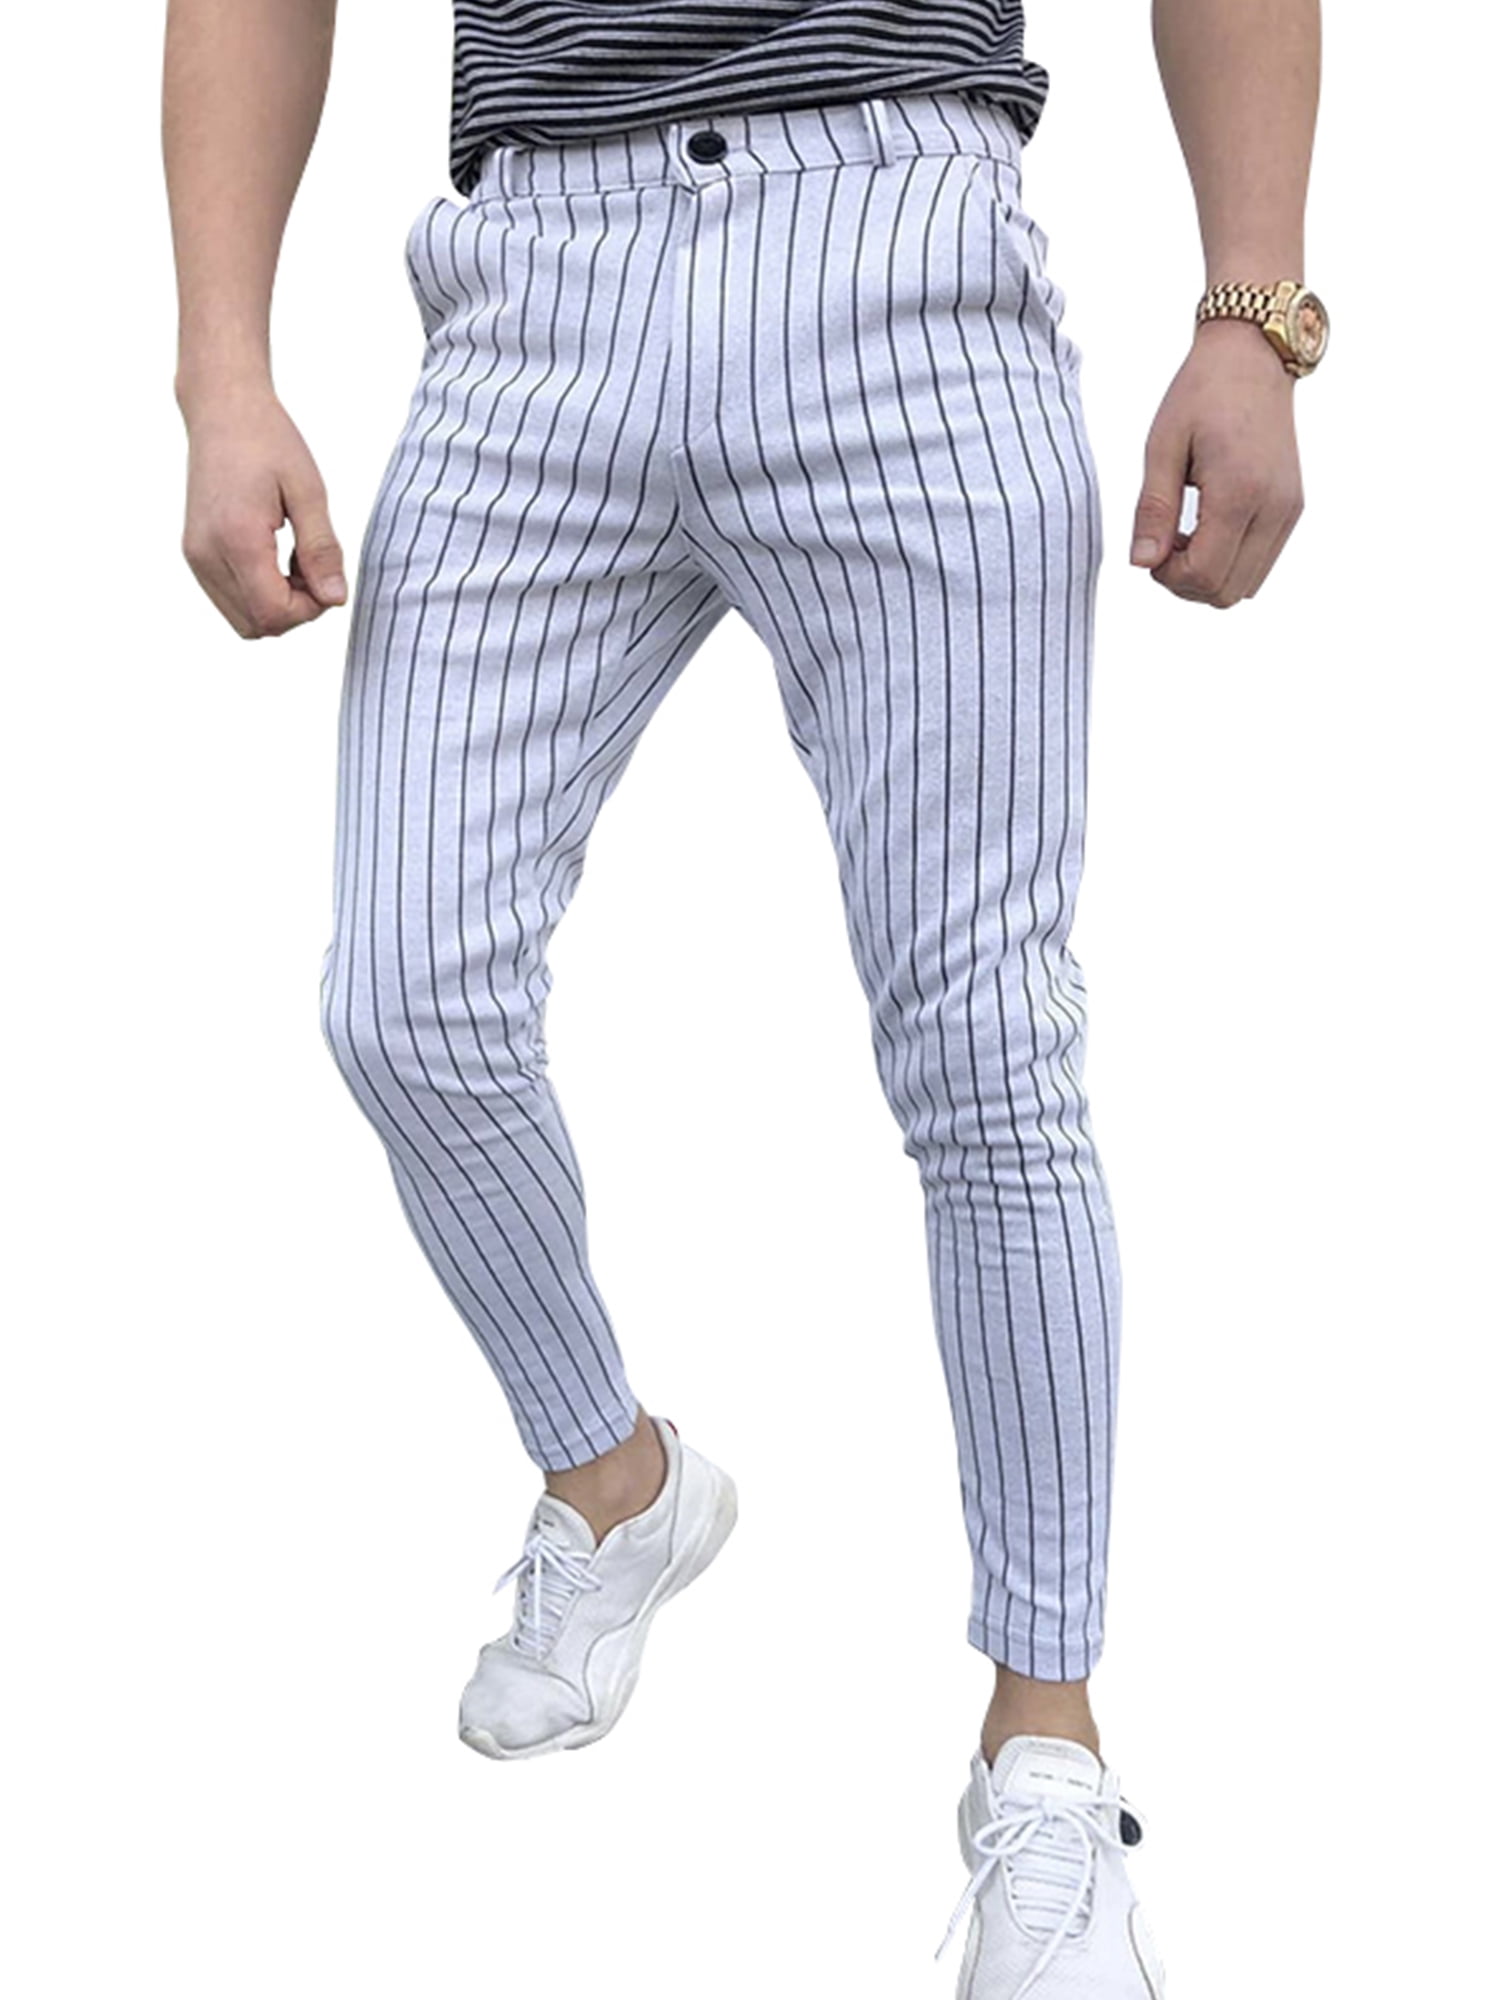 Mens Slim Fit Pants Skinny Formal Casual Zipper Stretch Solid Summer Trousers 